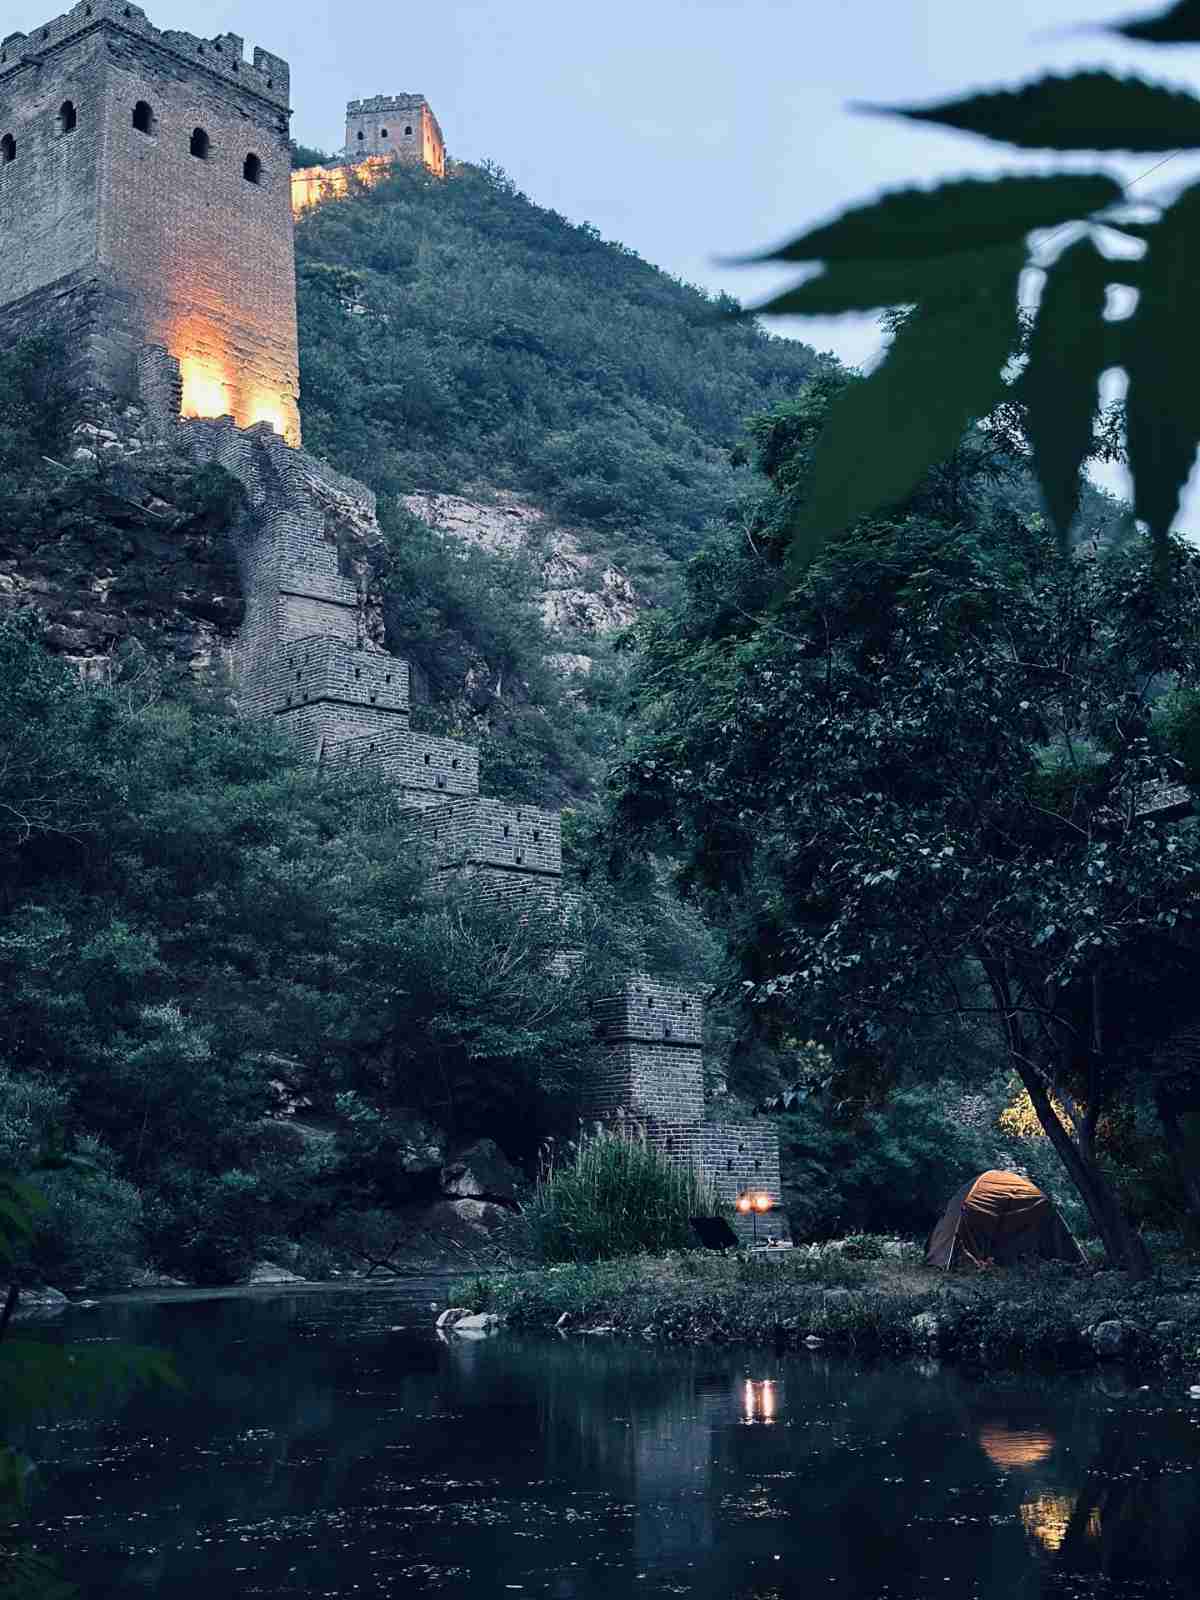 Camping at the foot of the Great Wall 1